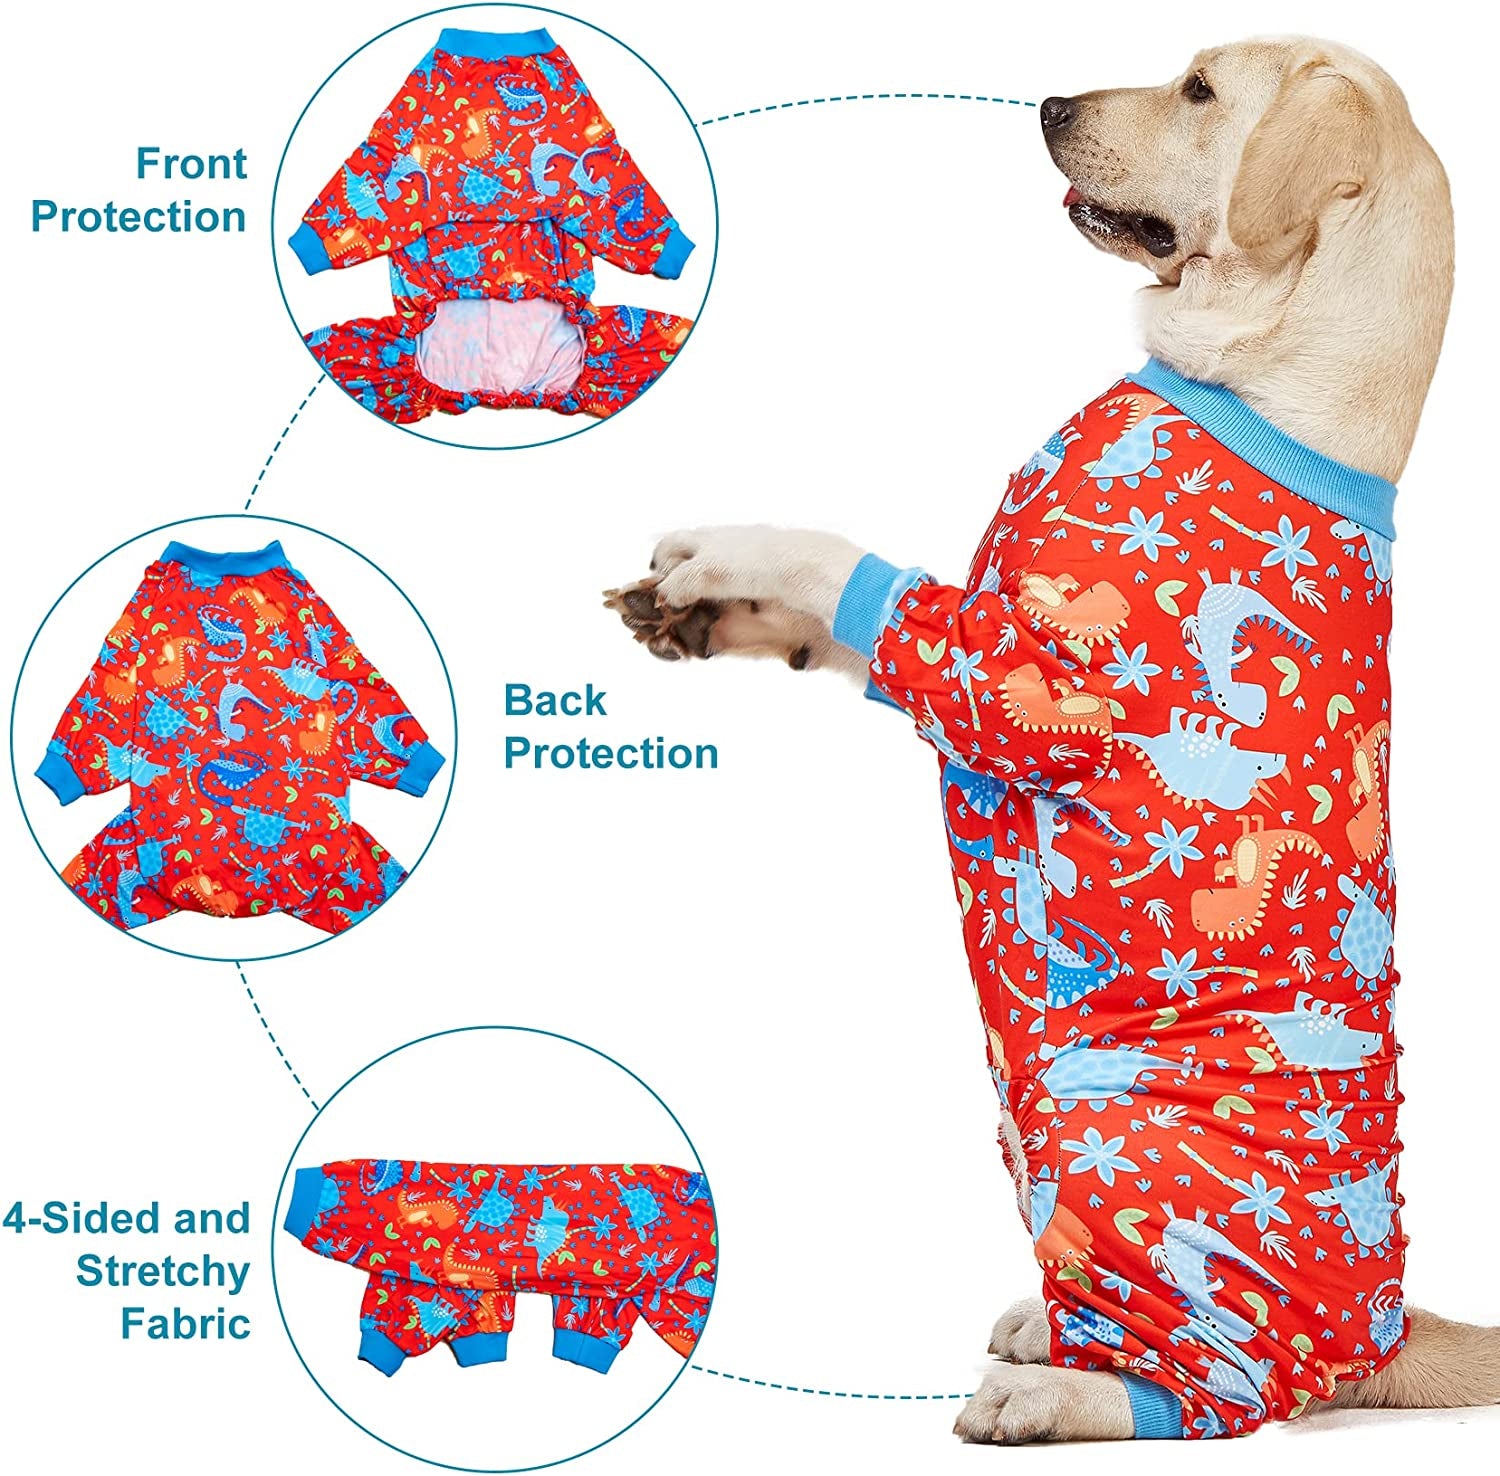 Lovinpet Pitbull Dog Pajamas, Large Dog Onesies for Surgery/Wound Care, Lightweight Stretchy Knit Fabric, Dinosaur Jungle Red Print Dog Pj'S UV Protection, Pet Anxiety Relief, Dog Costume/Xl